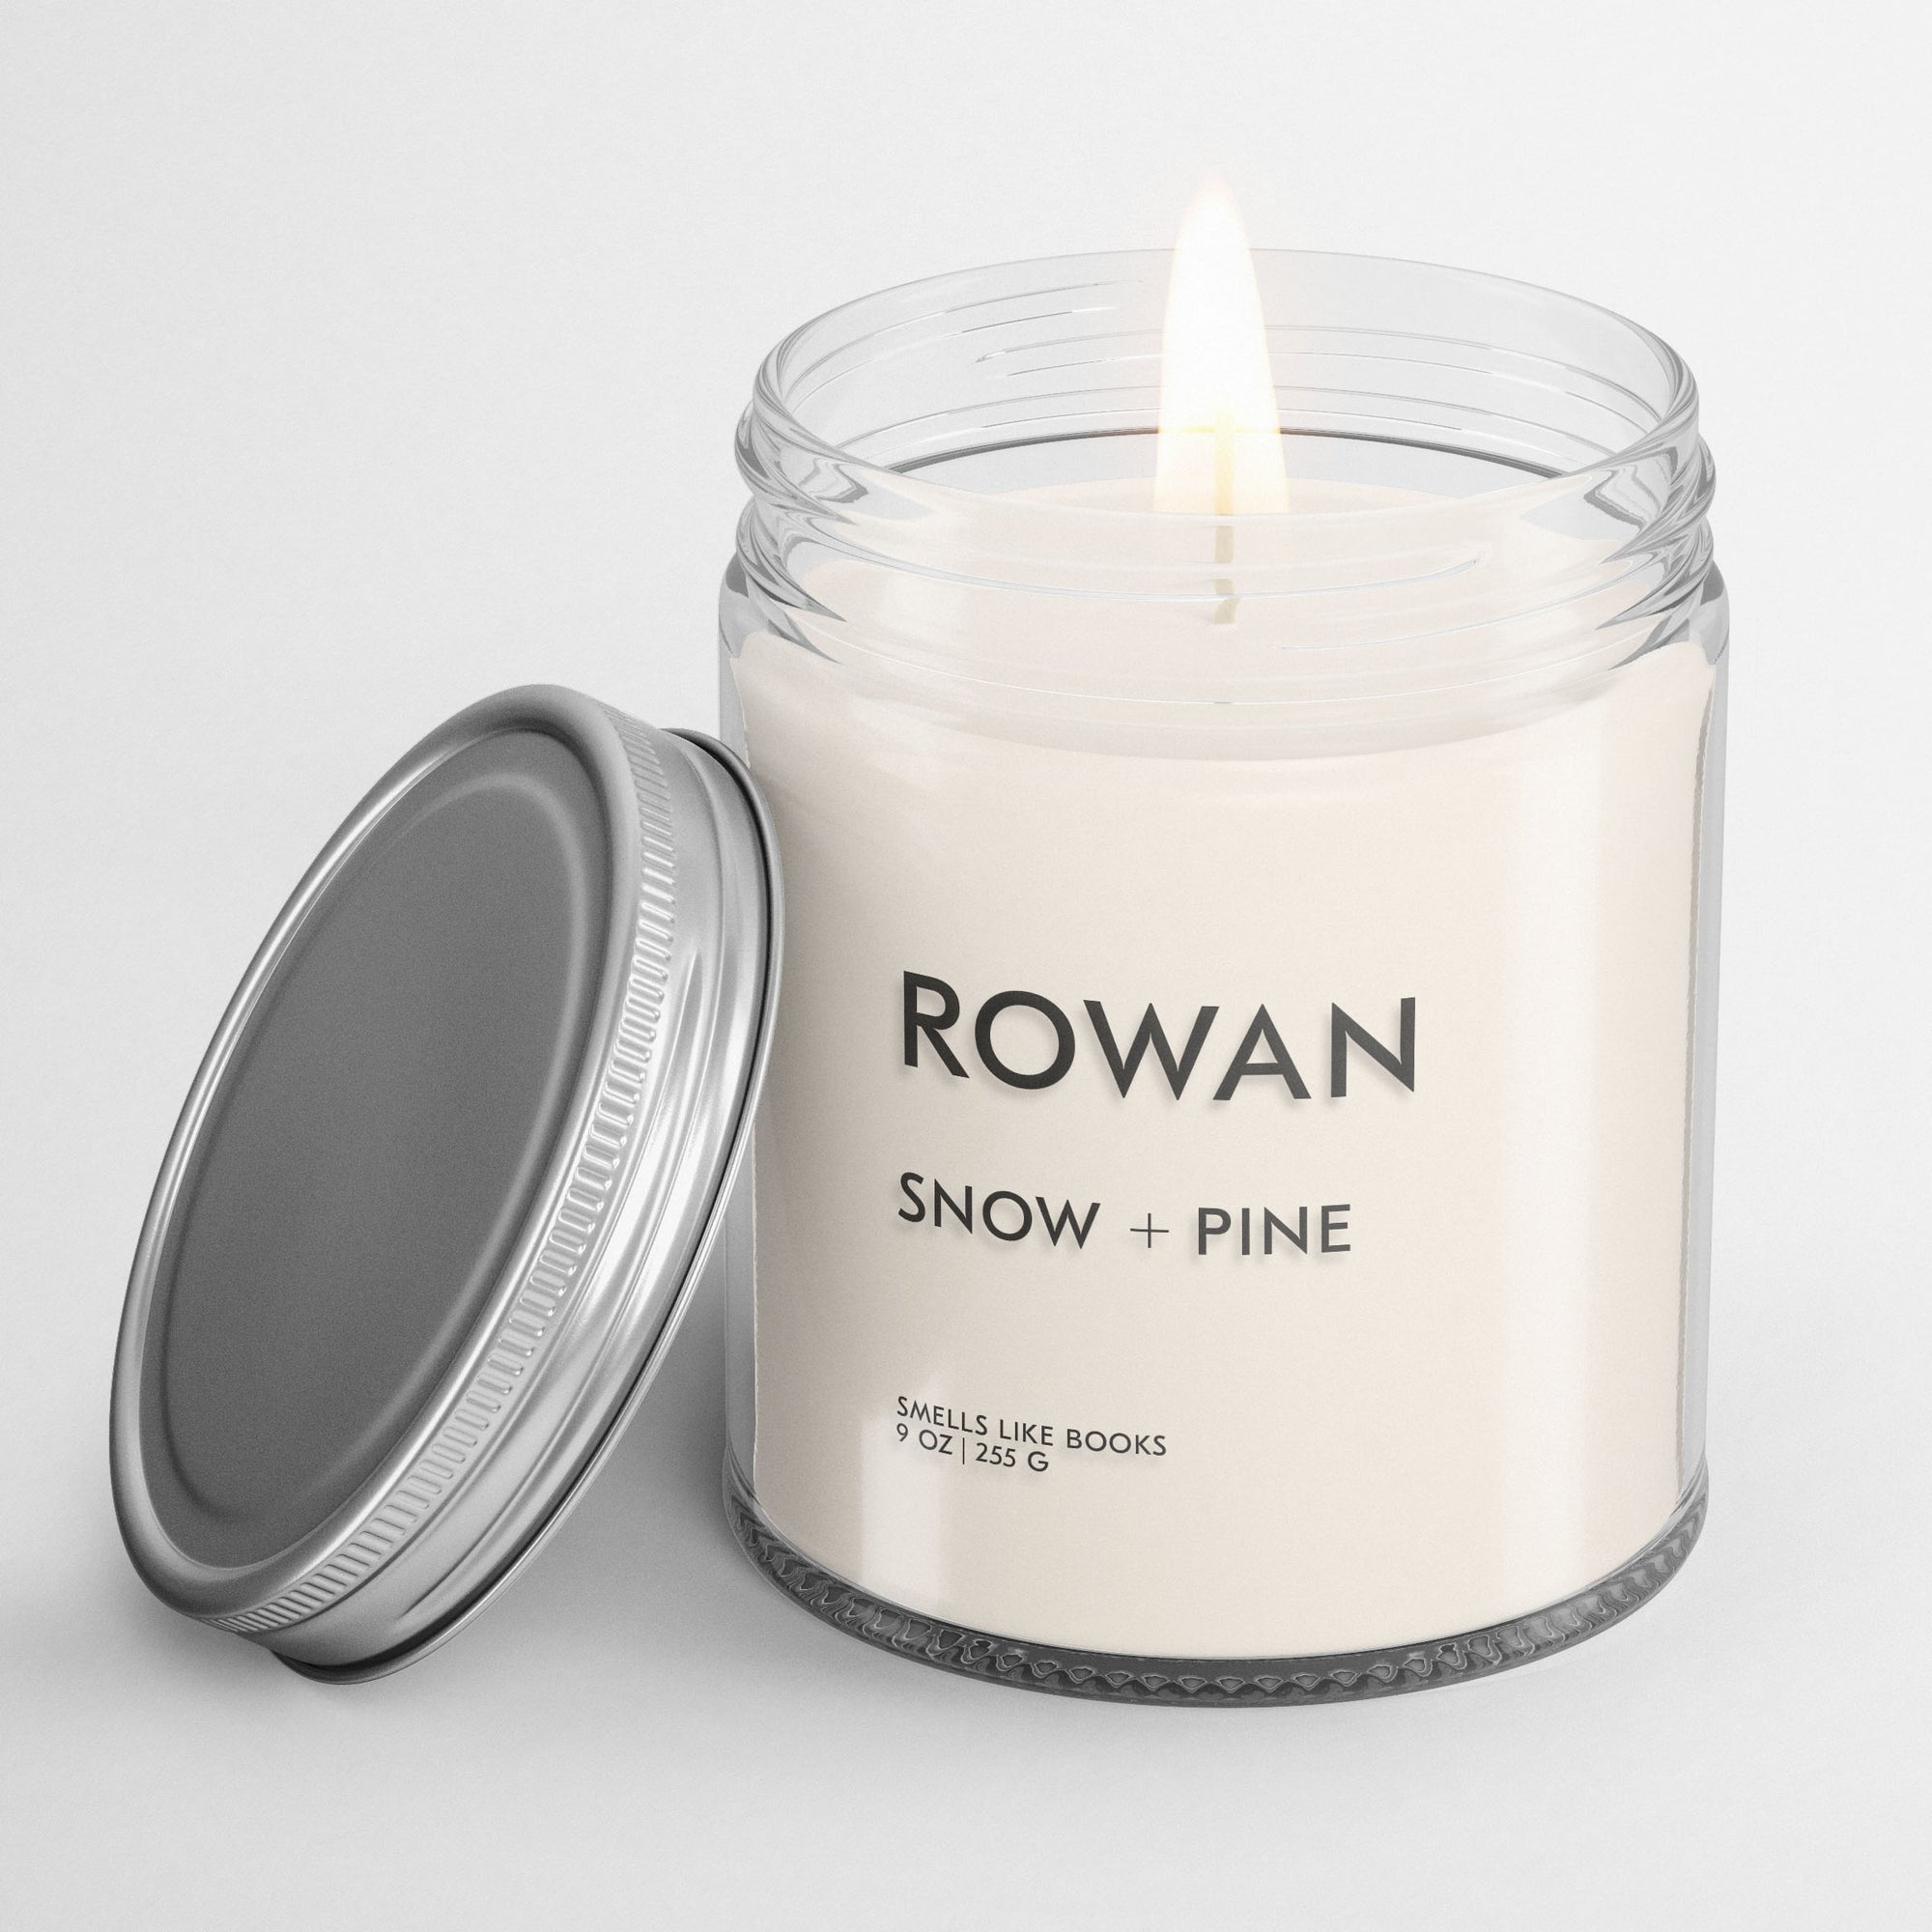 book inspired soy candle Smells Like Books ROWAN